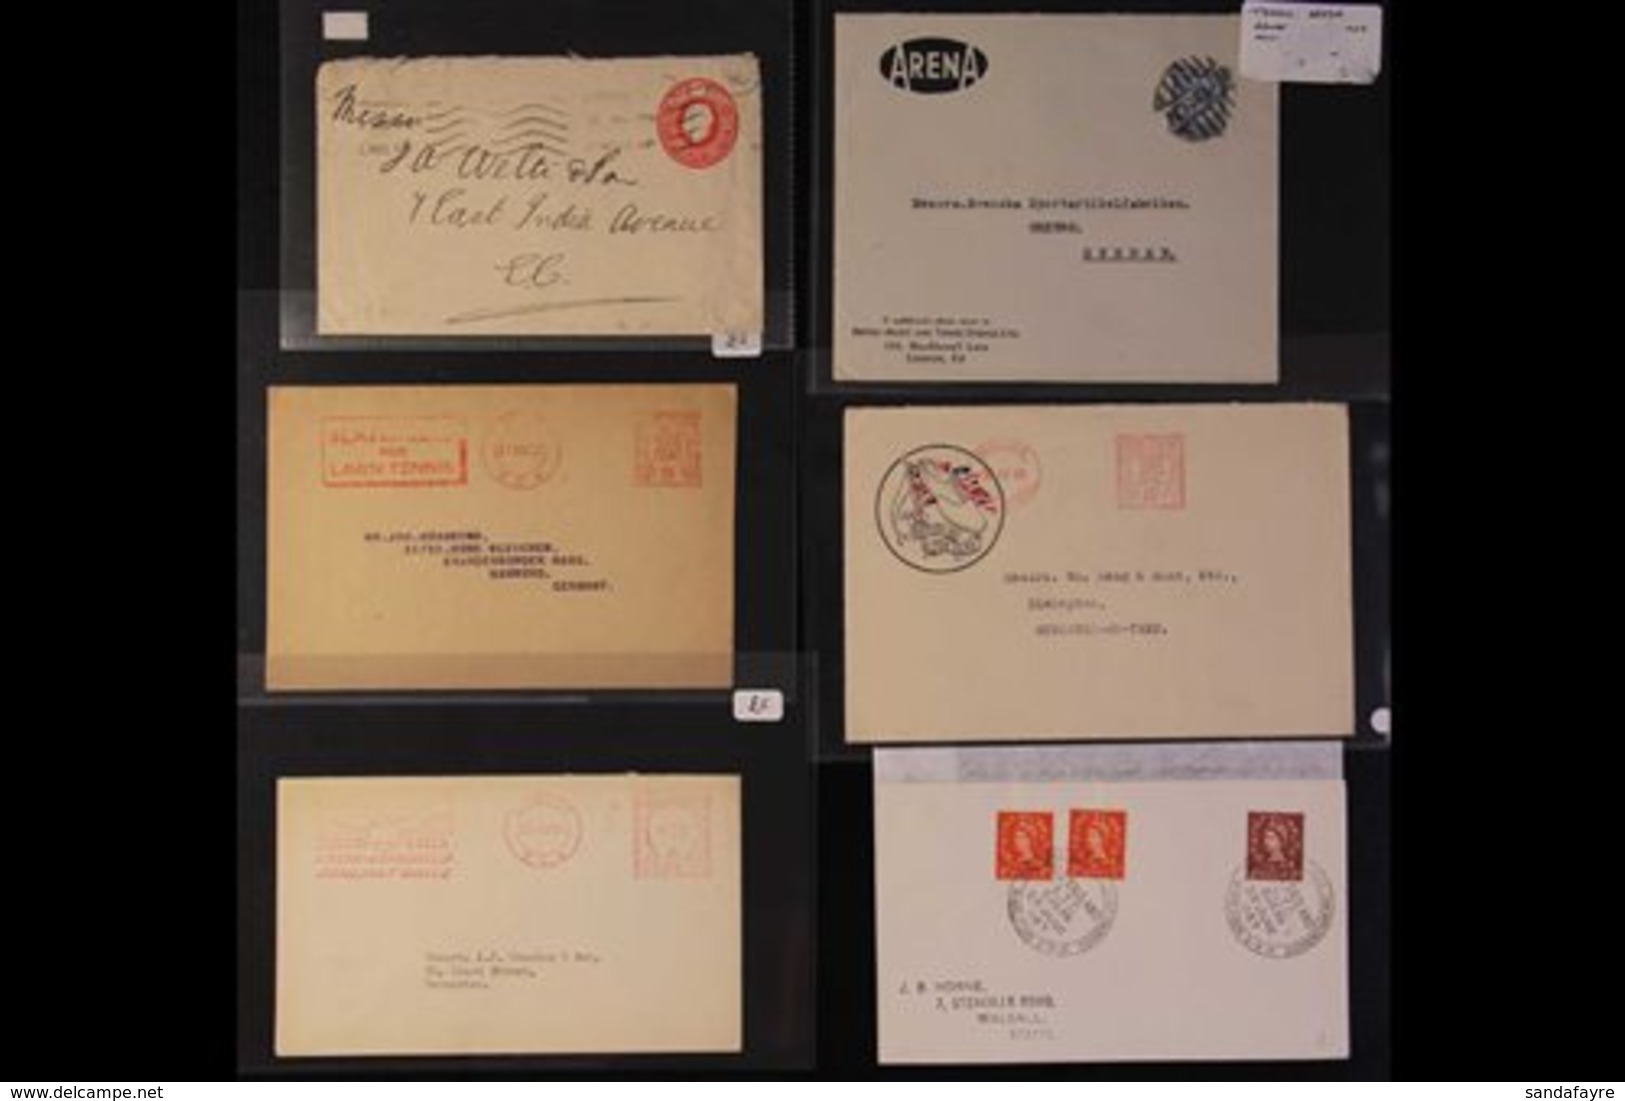 TENNIS ADVERTISING ENVELOPES & CANCELLATIONS All Related To Tennis, We See 1920s "Arena" Who Manufactured Tennis & Badmi - Sin Clasificación